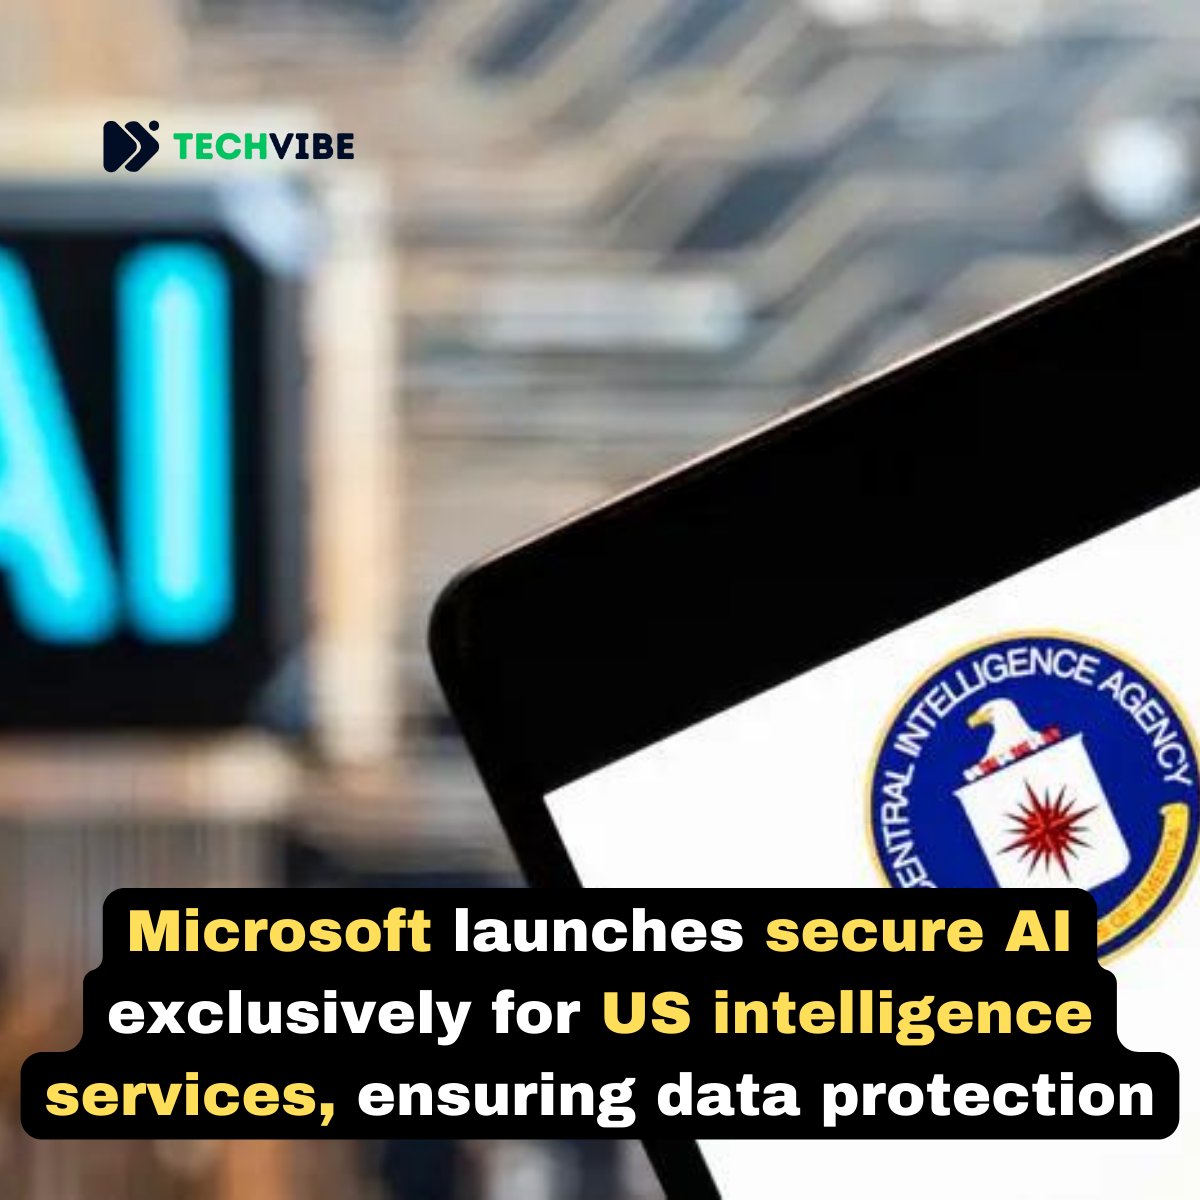 Microsoft introduces a groundbreaking, secure AI model tailored for US intelligence services, marking a significant leap in safeguarding classified data and national security. more: t.ly/dPPyY #Microsoft #US #AI #AInews